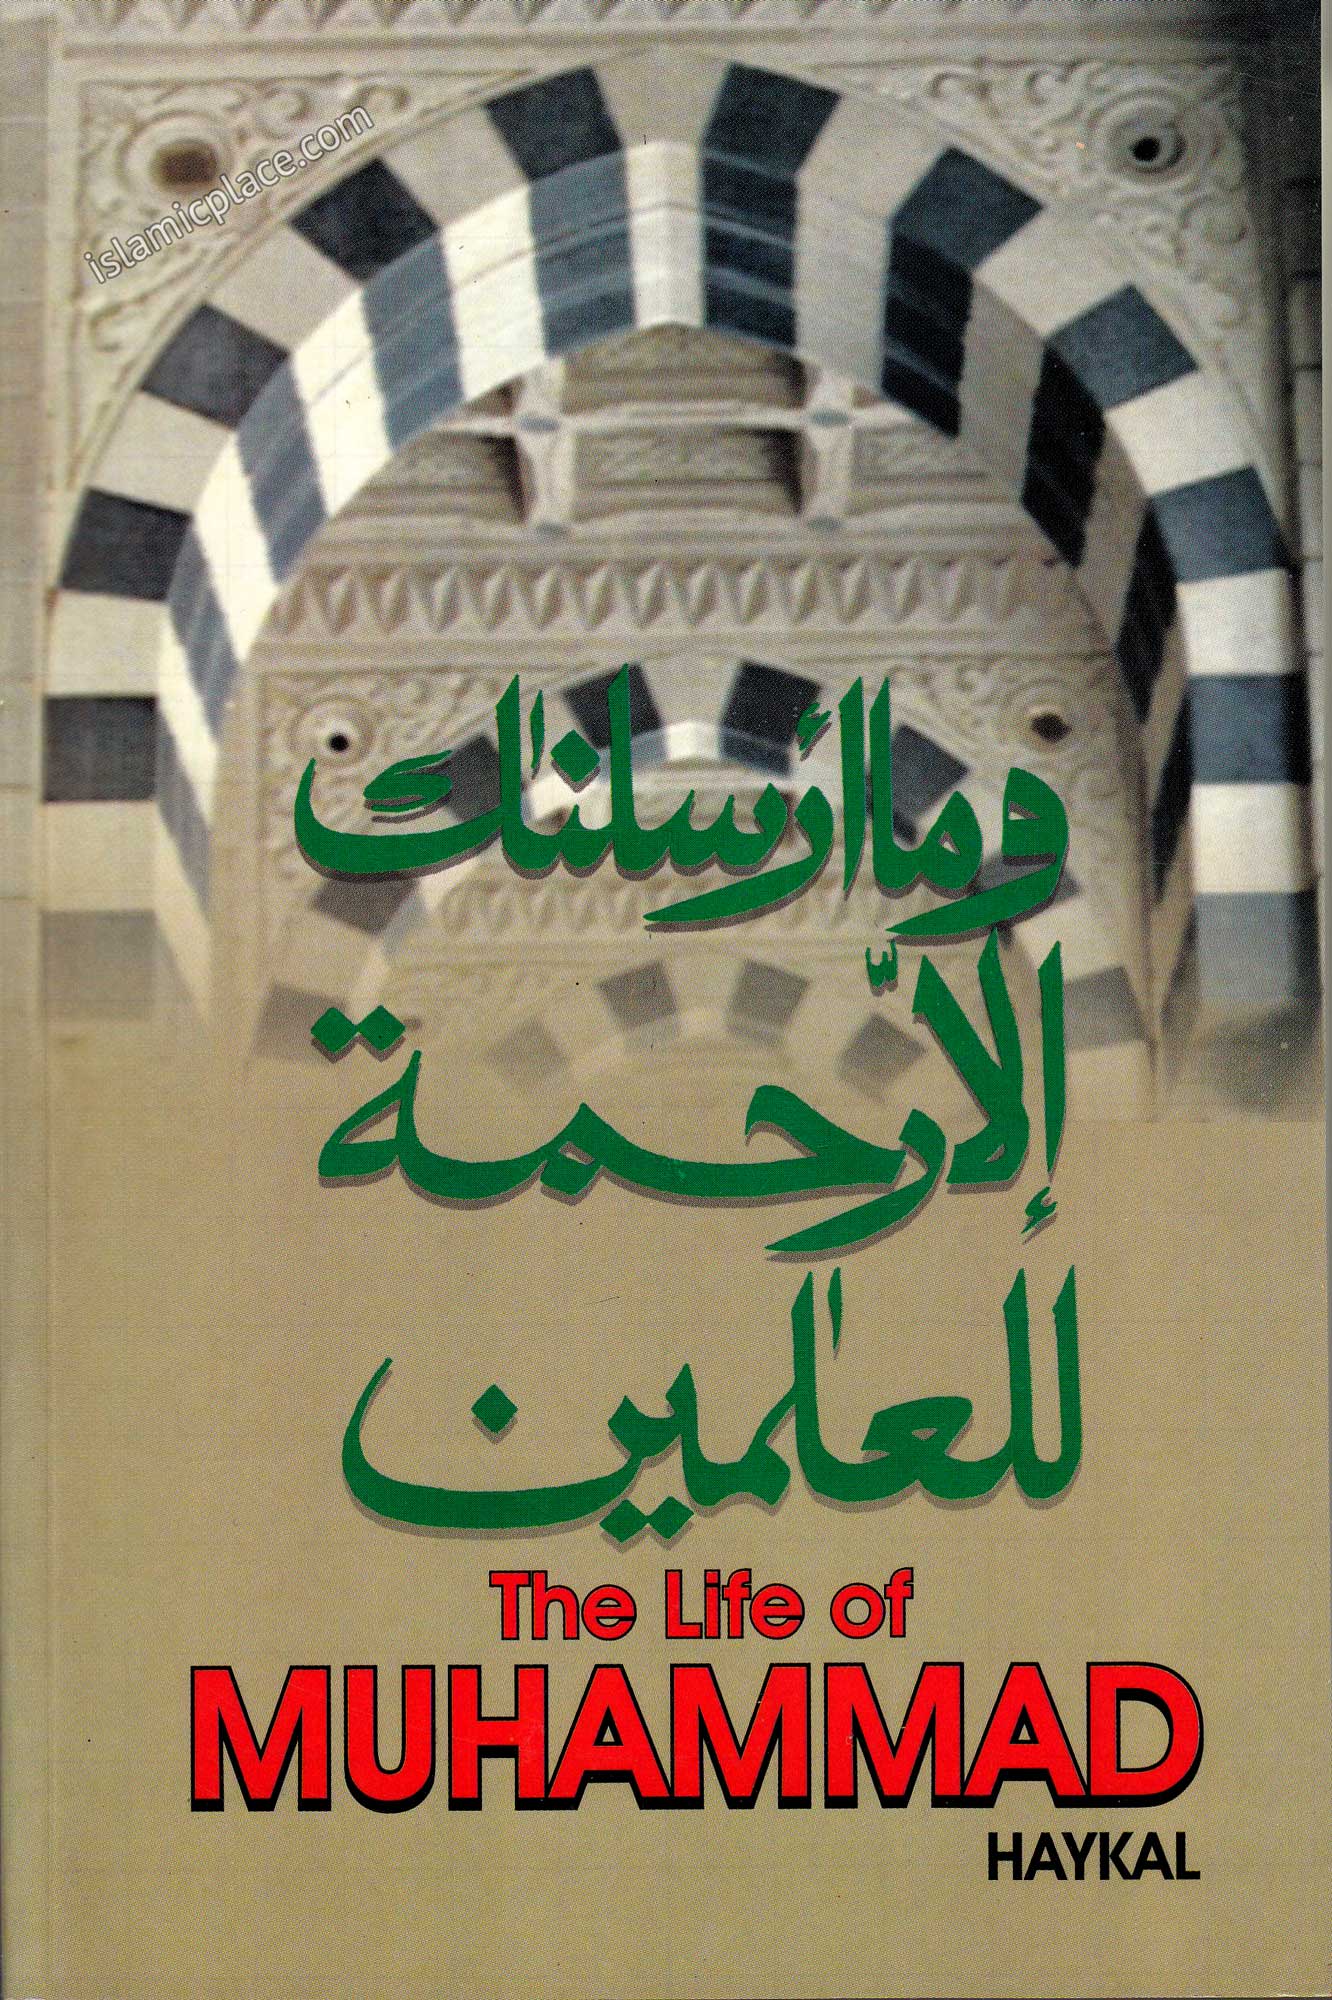 The Life of Muhammad by Haykal (paperback)